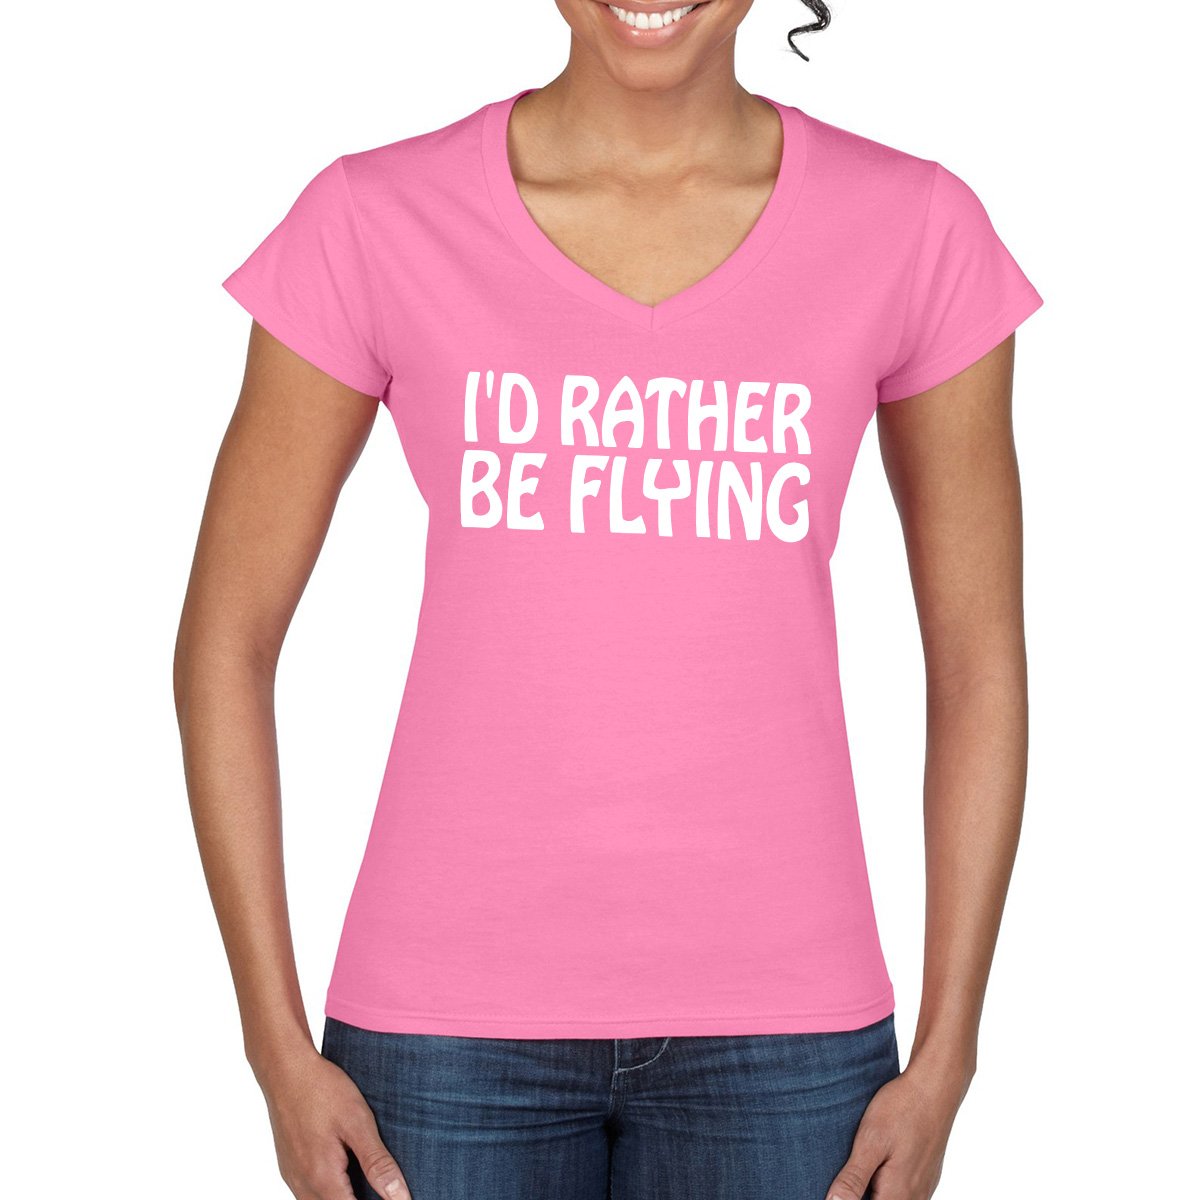 RATHER BE FLYING Women's Semi-Fitted T-Shirt